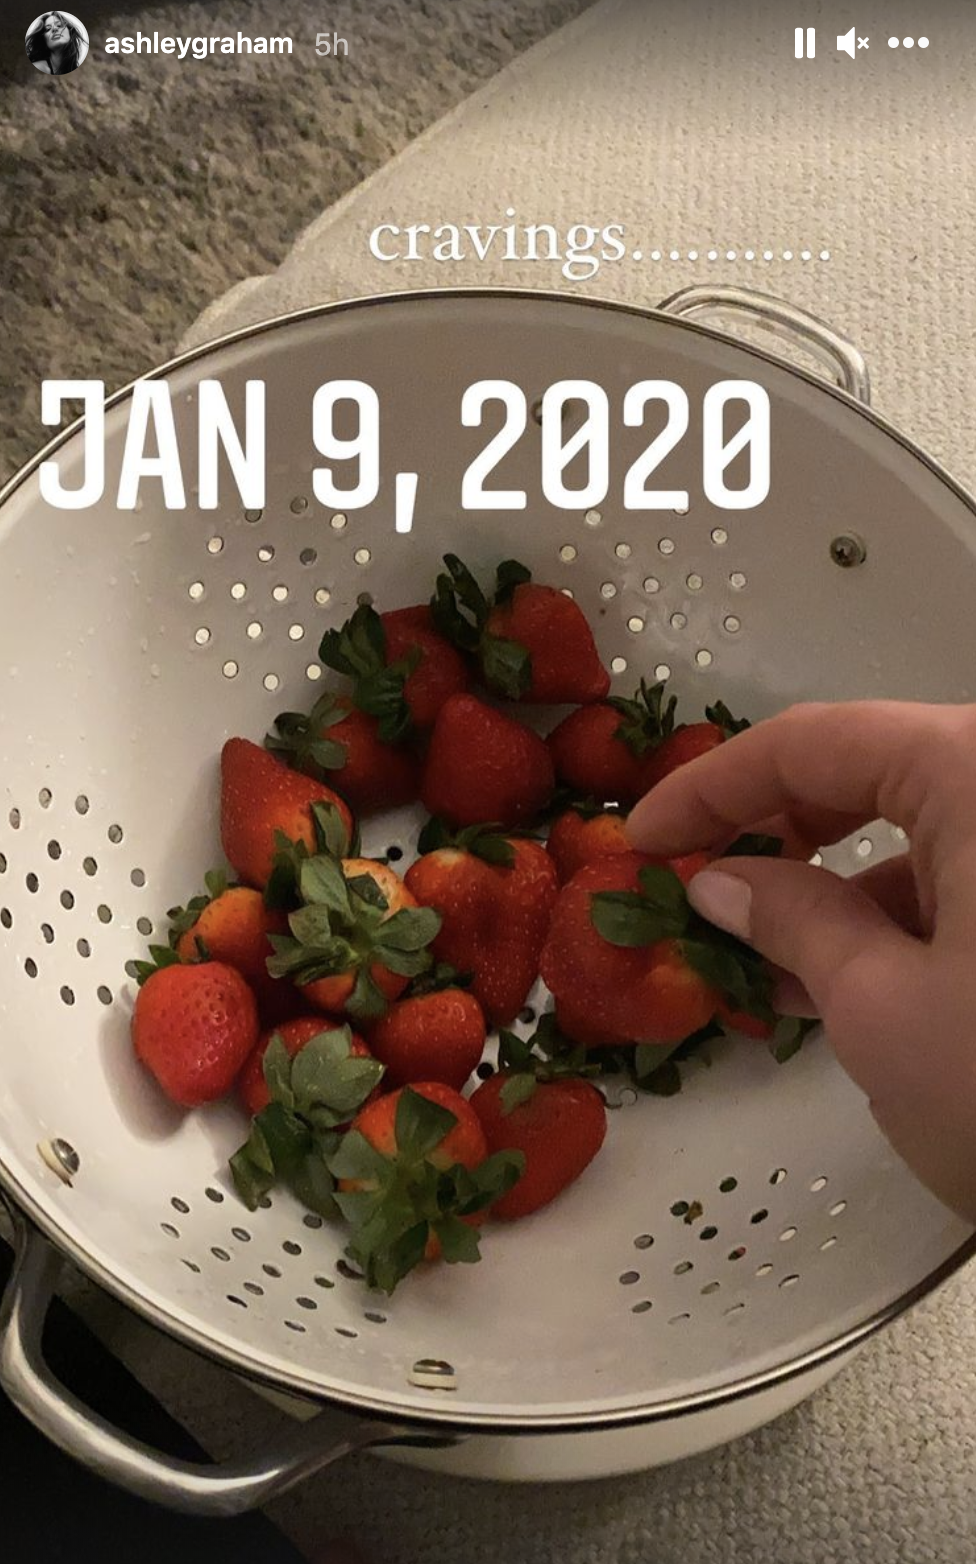 Ashley reaching into a colander full of strawberries